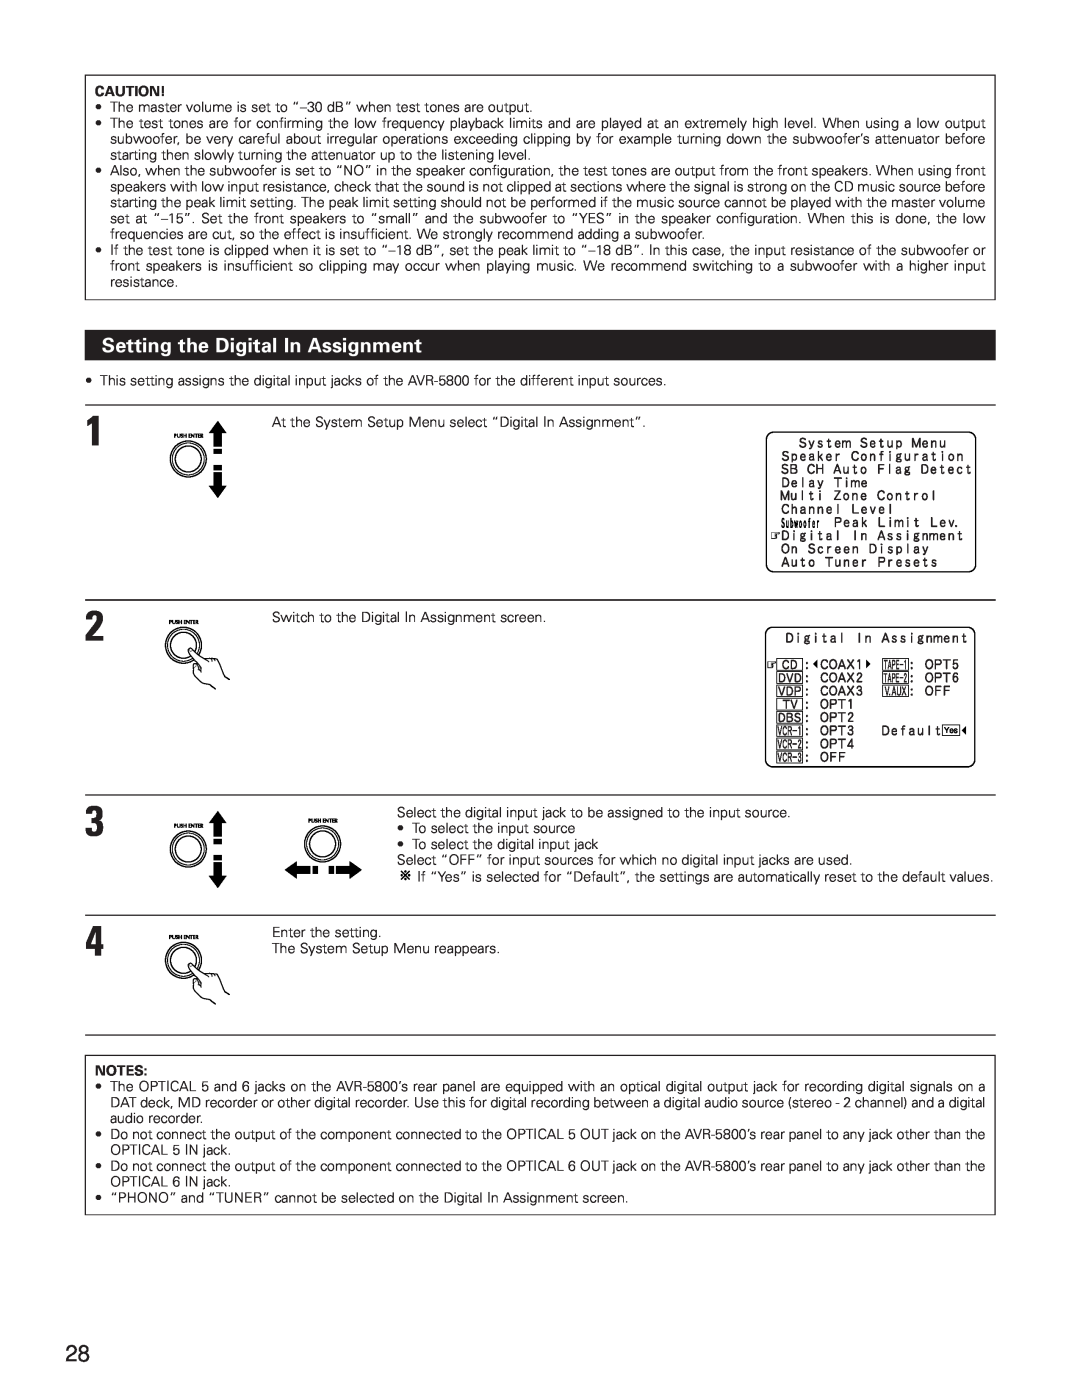 Denon AVR-5800 operating instructions Setting the Digital In Assignment 